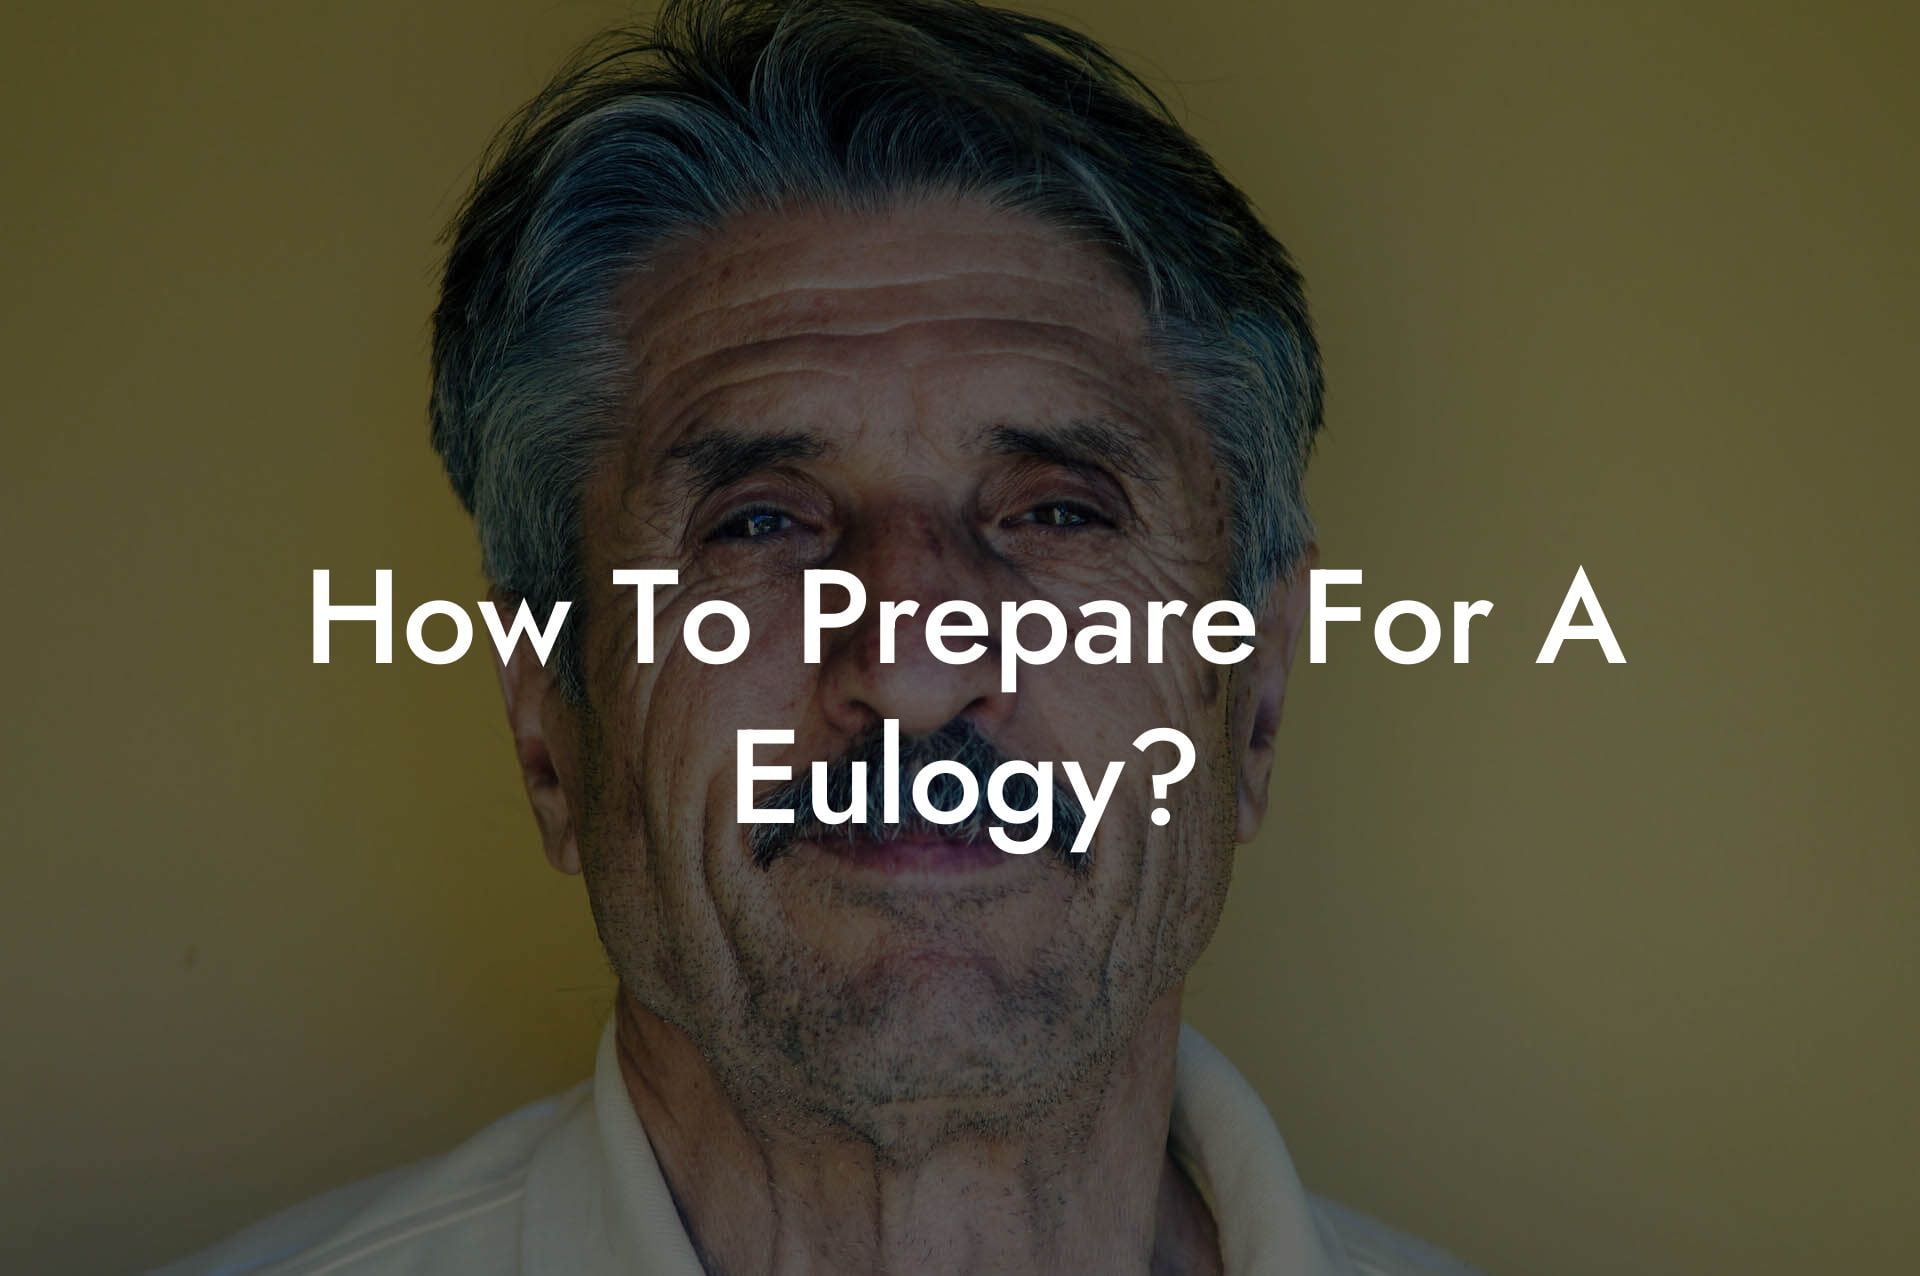 How To Prepare For A Eulogy?